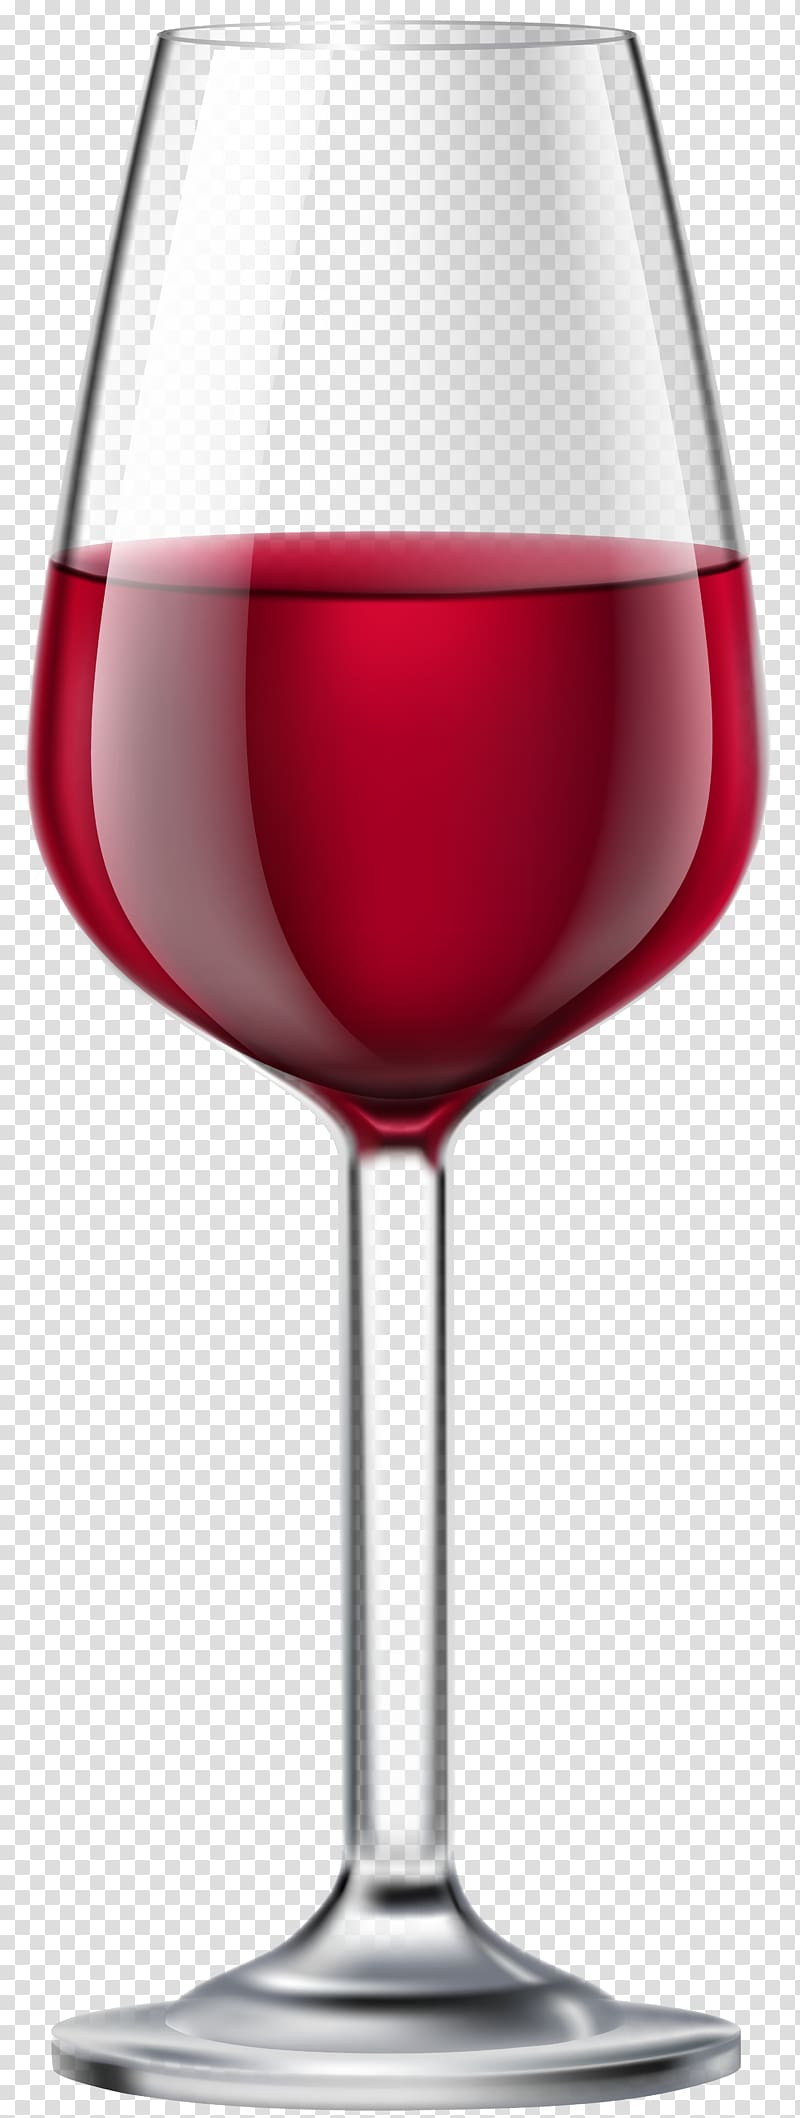 Clear wine glass, Red Wine Wine glass Cocktail , Glass of.